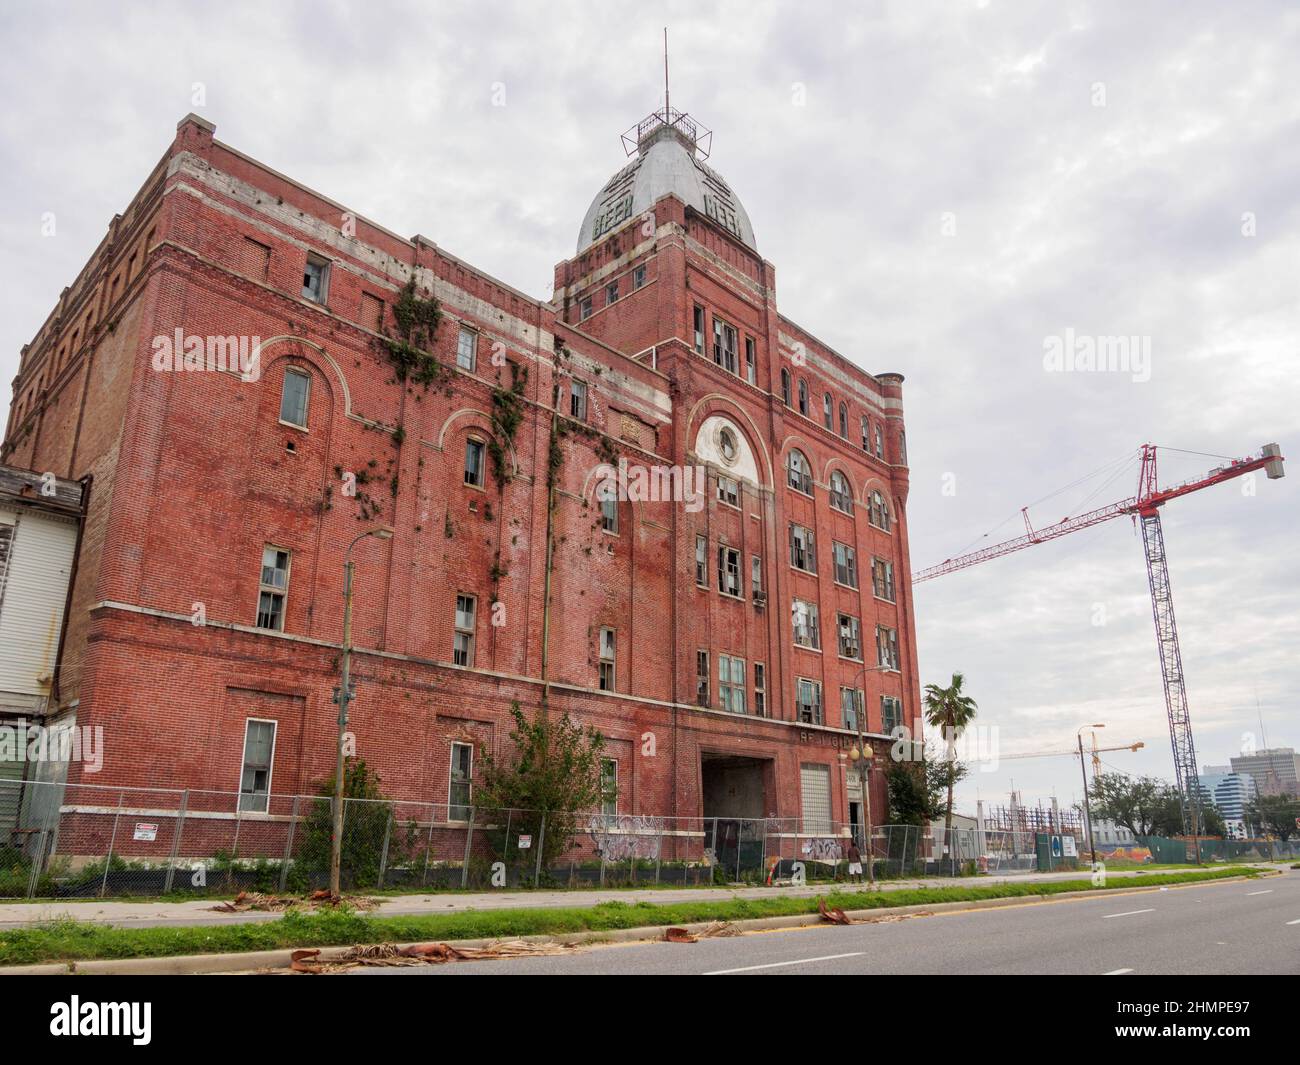 NEW ORLEANS, LA - SEPTEMBER 2, 2012: Historic Dixie Brewery on Tulane Avenue Stock Photo